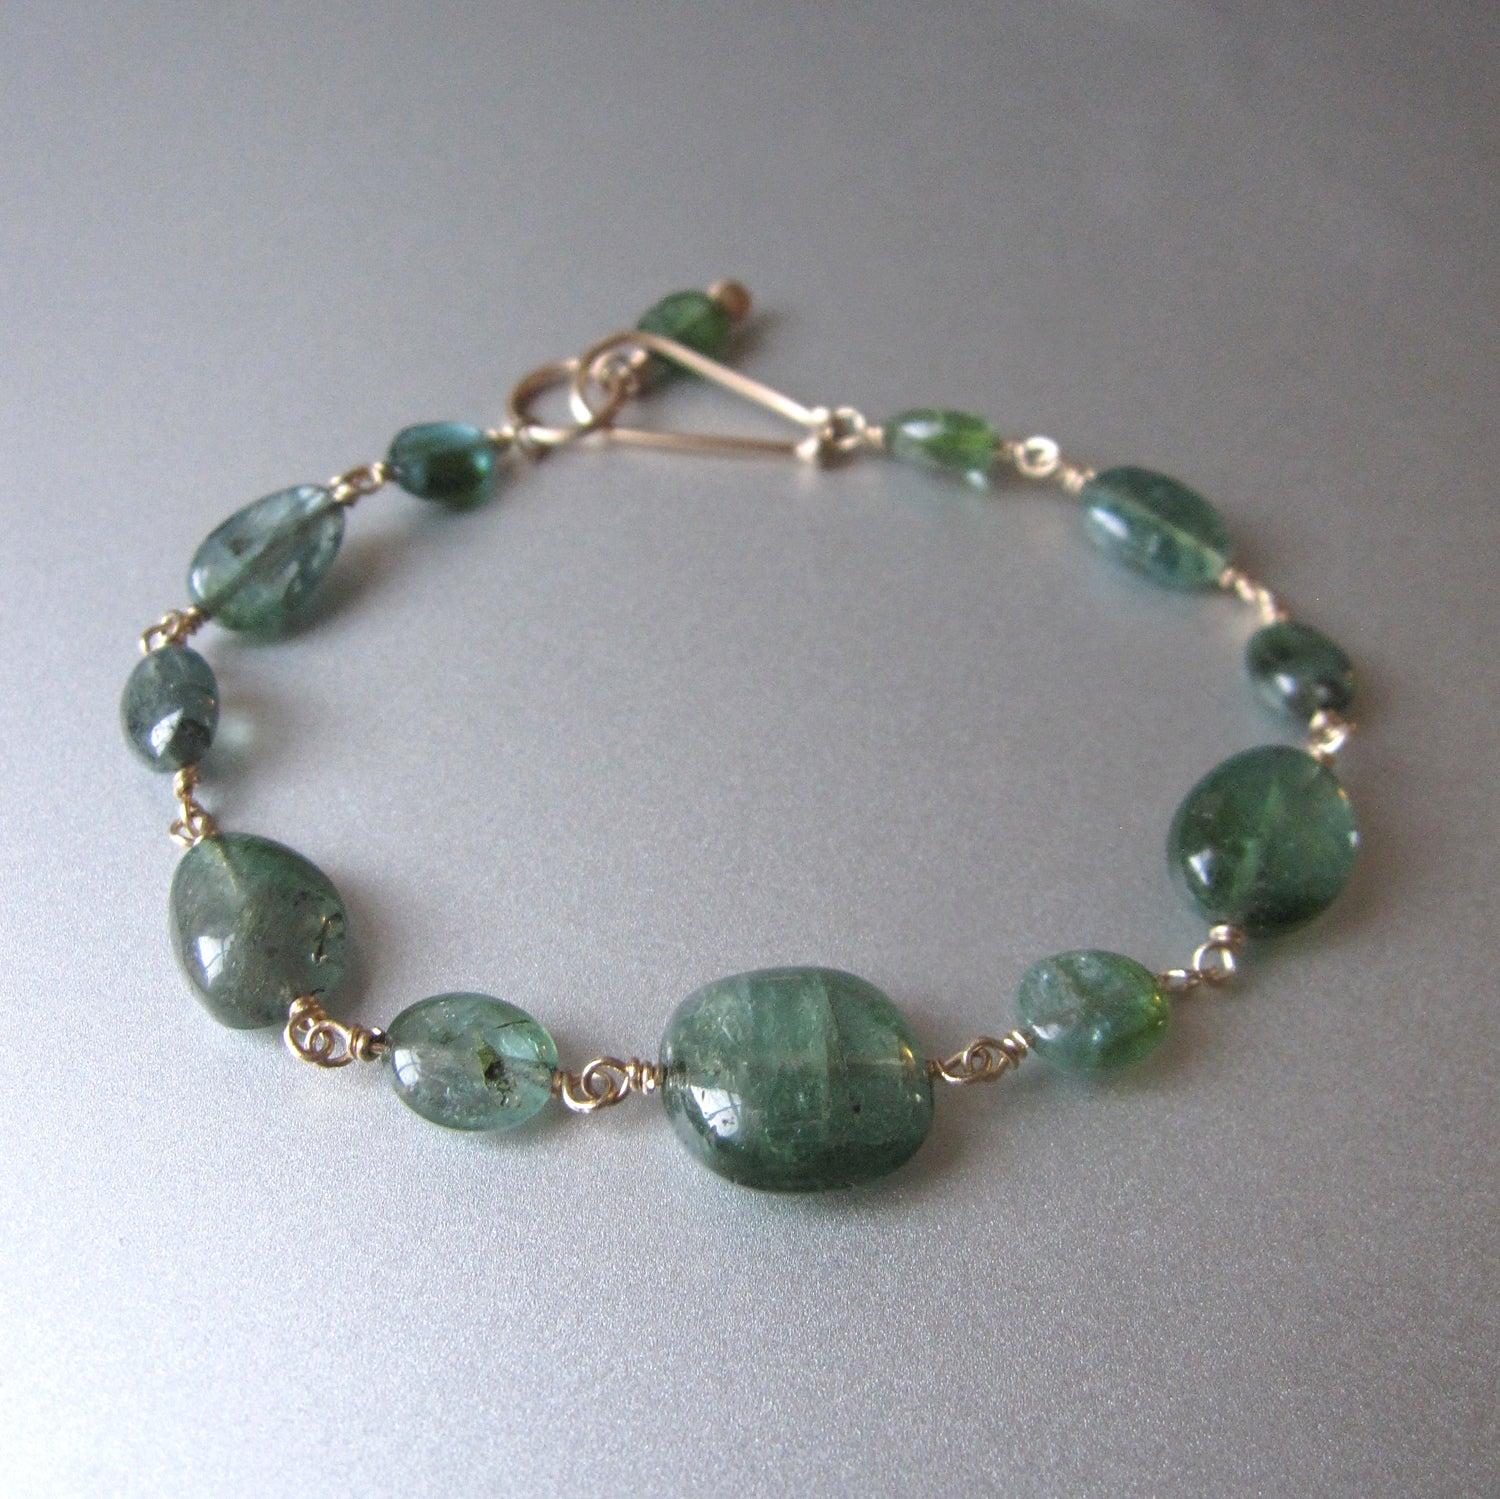 Sold at auction 14kt Gold and Blue-Green Tourmaline Bracelet Auction Number  2352 Lot Number 607 | Skinner Auctioneers